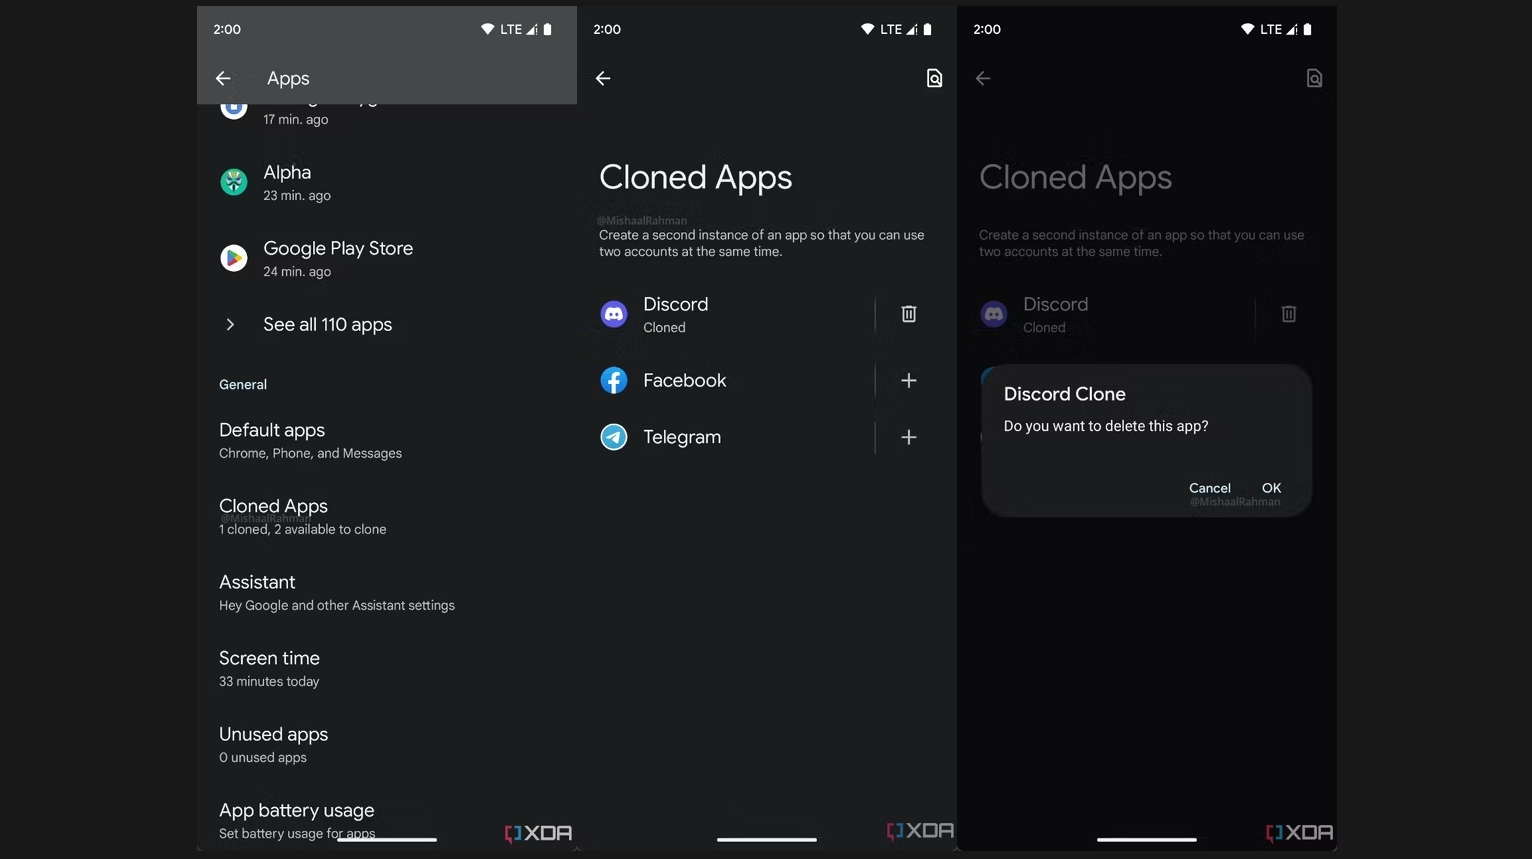 Screenshots showing the cloned apps feature on Android 14